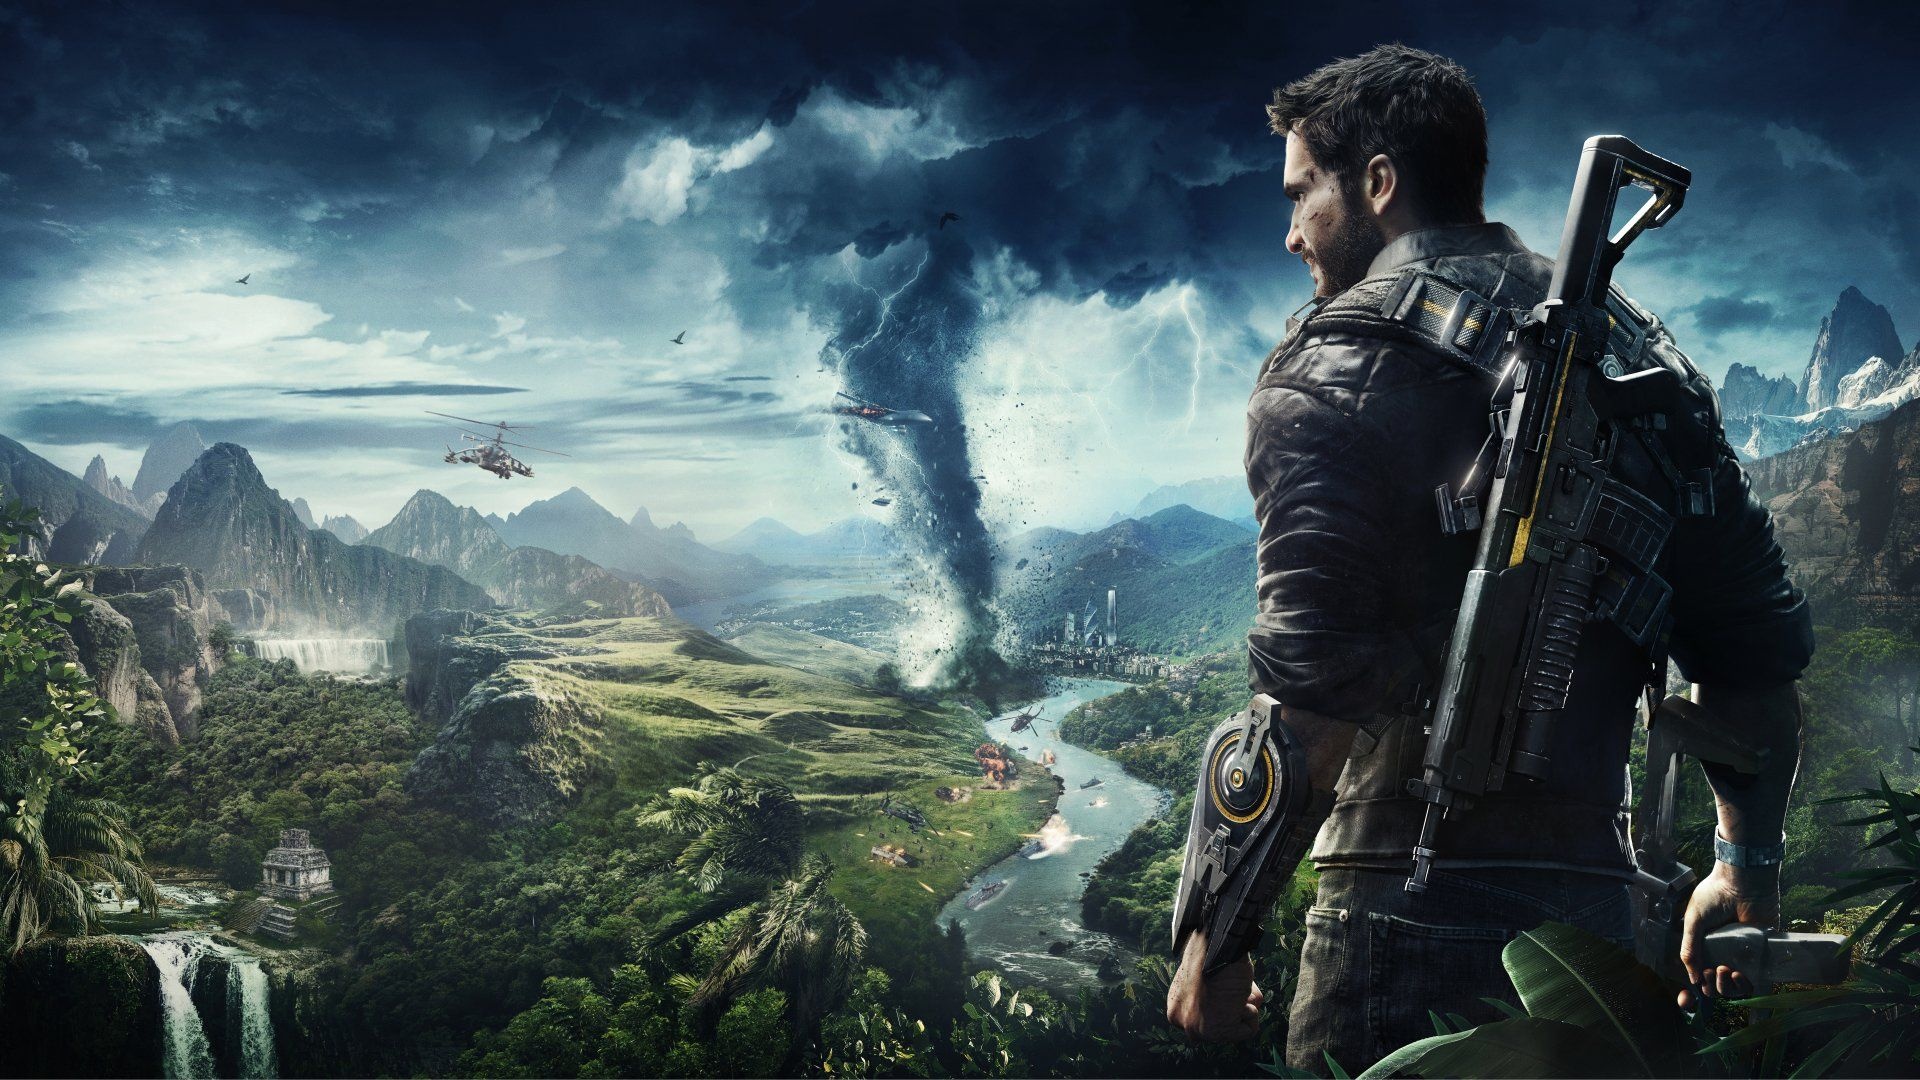 Just Cause 4 wallpapers, Action-packed backgrounds, Gaming excitement, Popular favorites, 1920x1080 Full HD Desktop